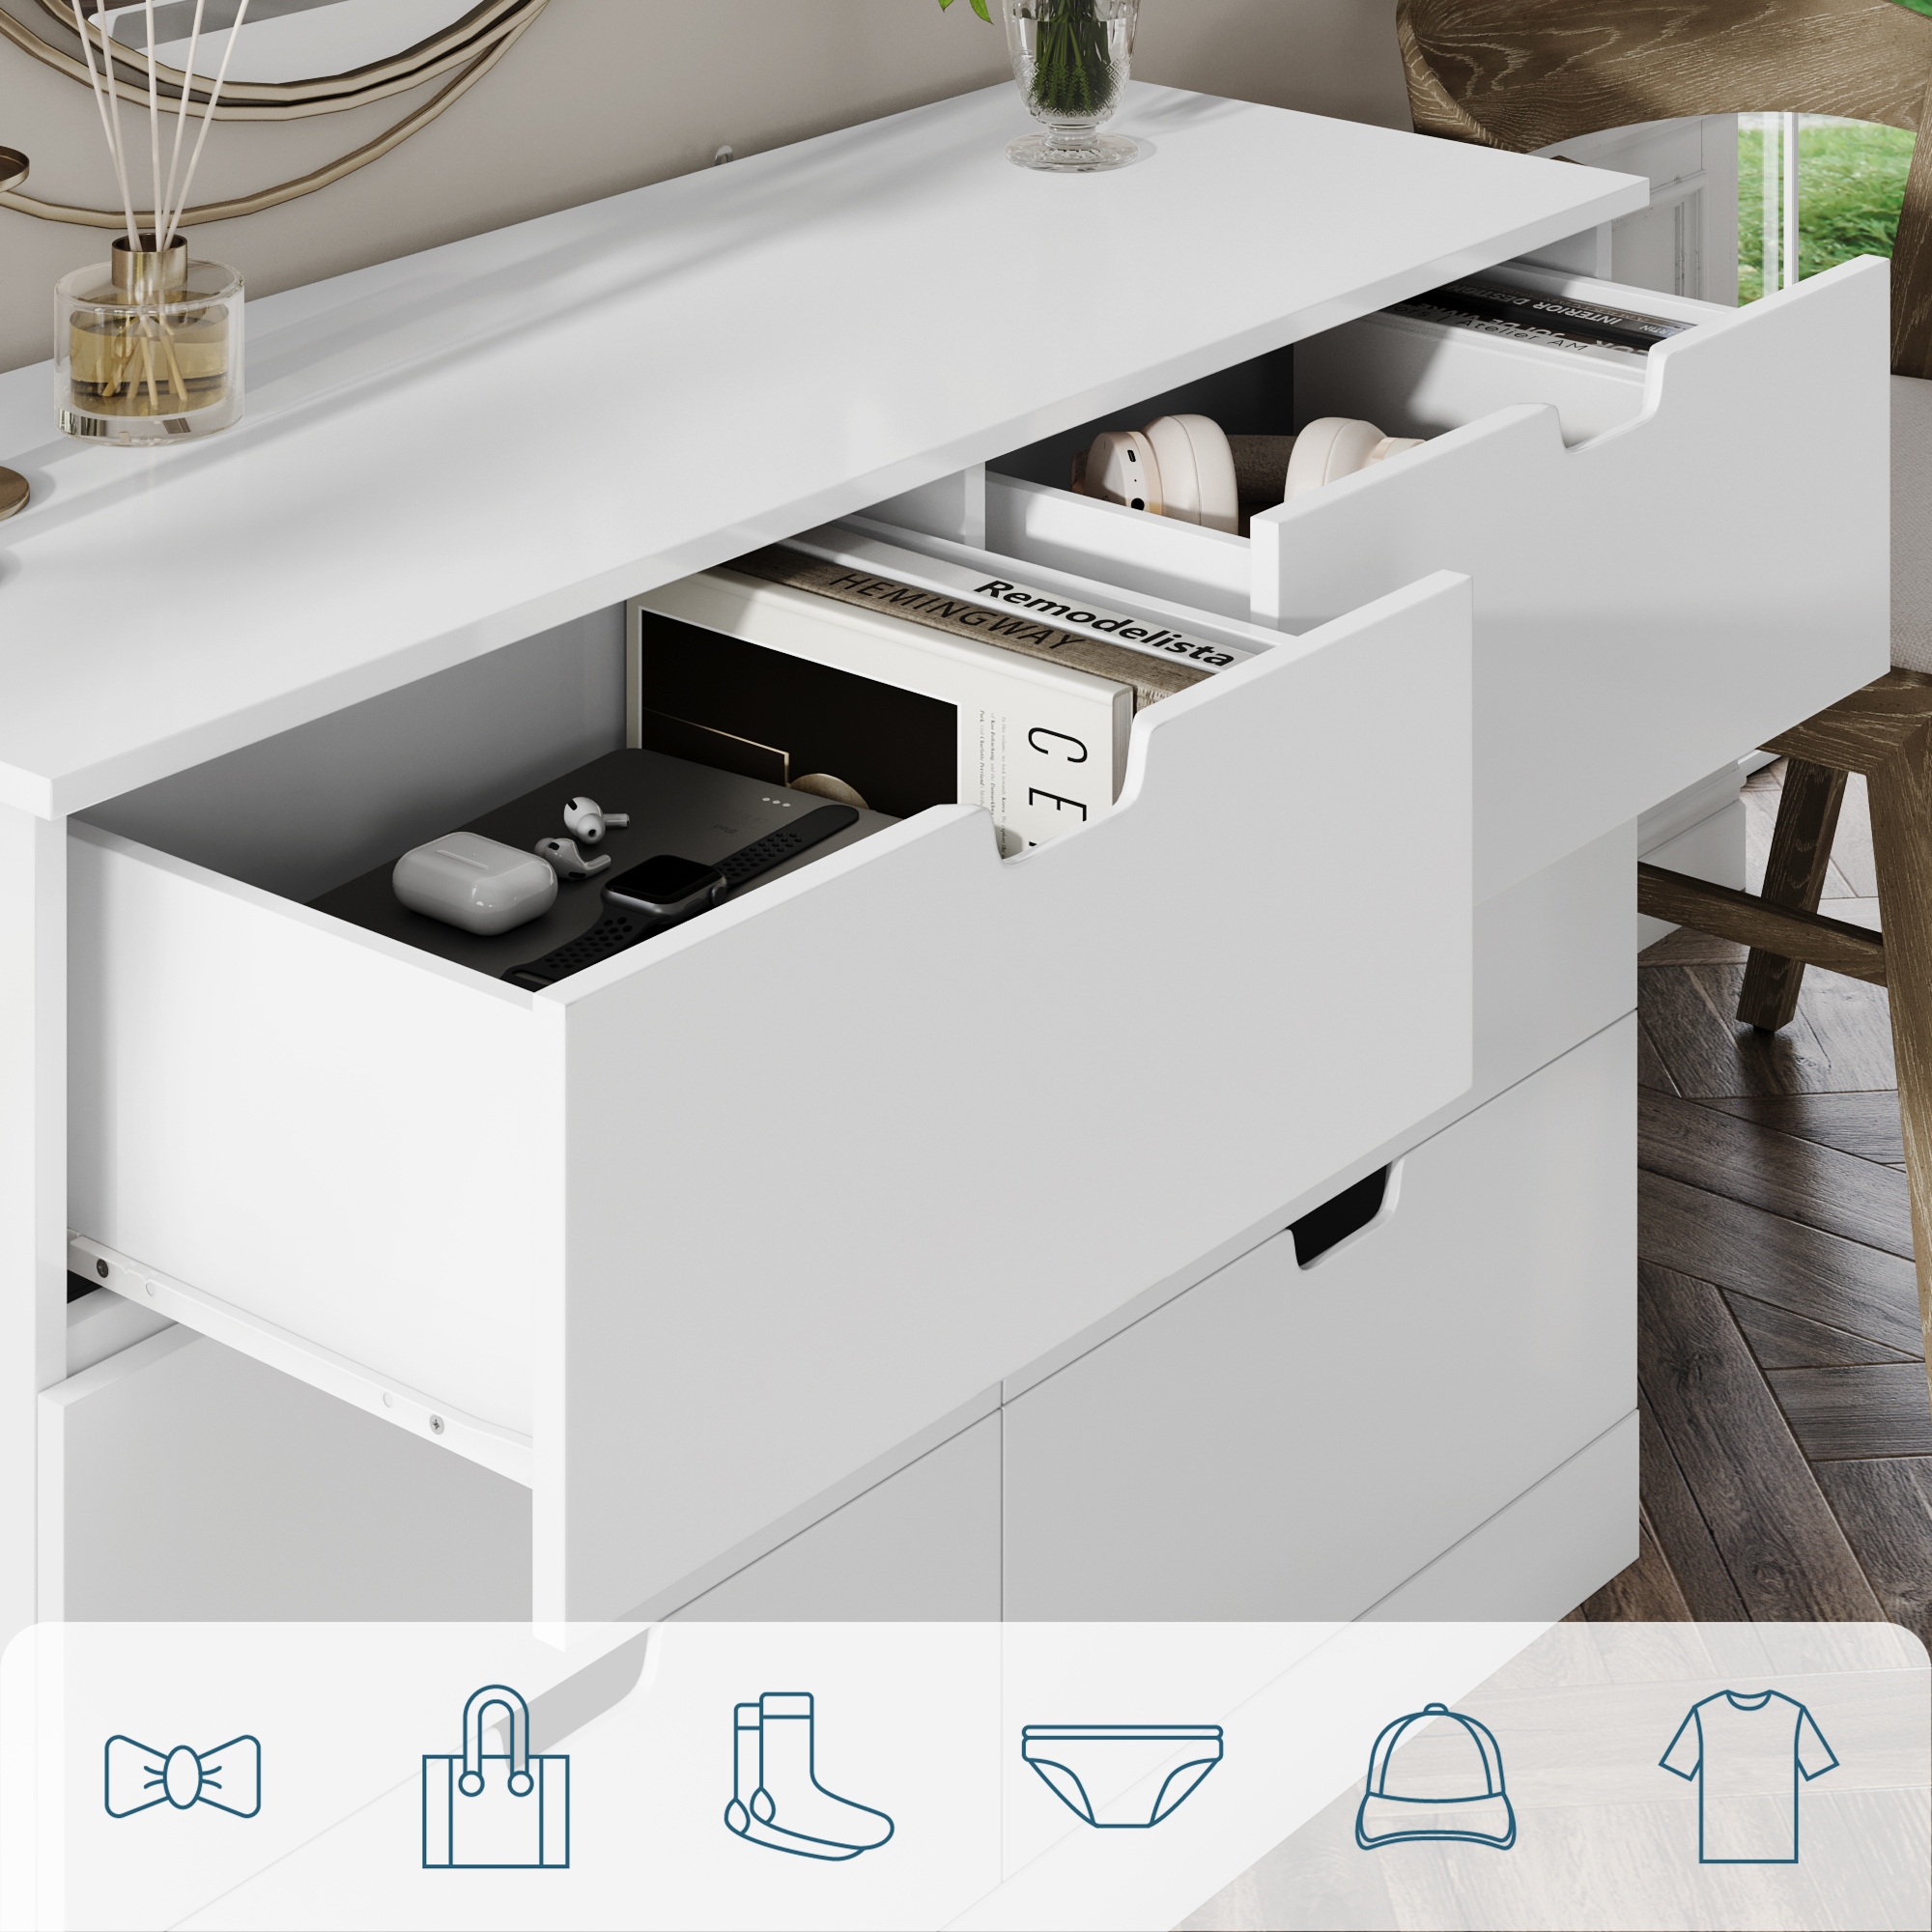 Homfa 6 Drawer Double Dresser for Bedroom, Modern White Chest, Wood Storage Cabinet for Living Room - image 5 of 10